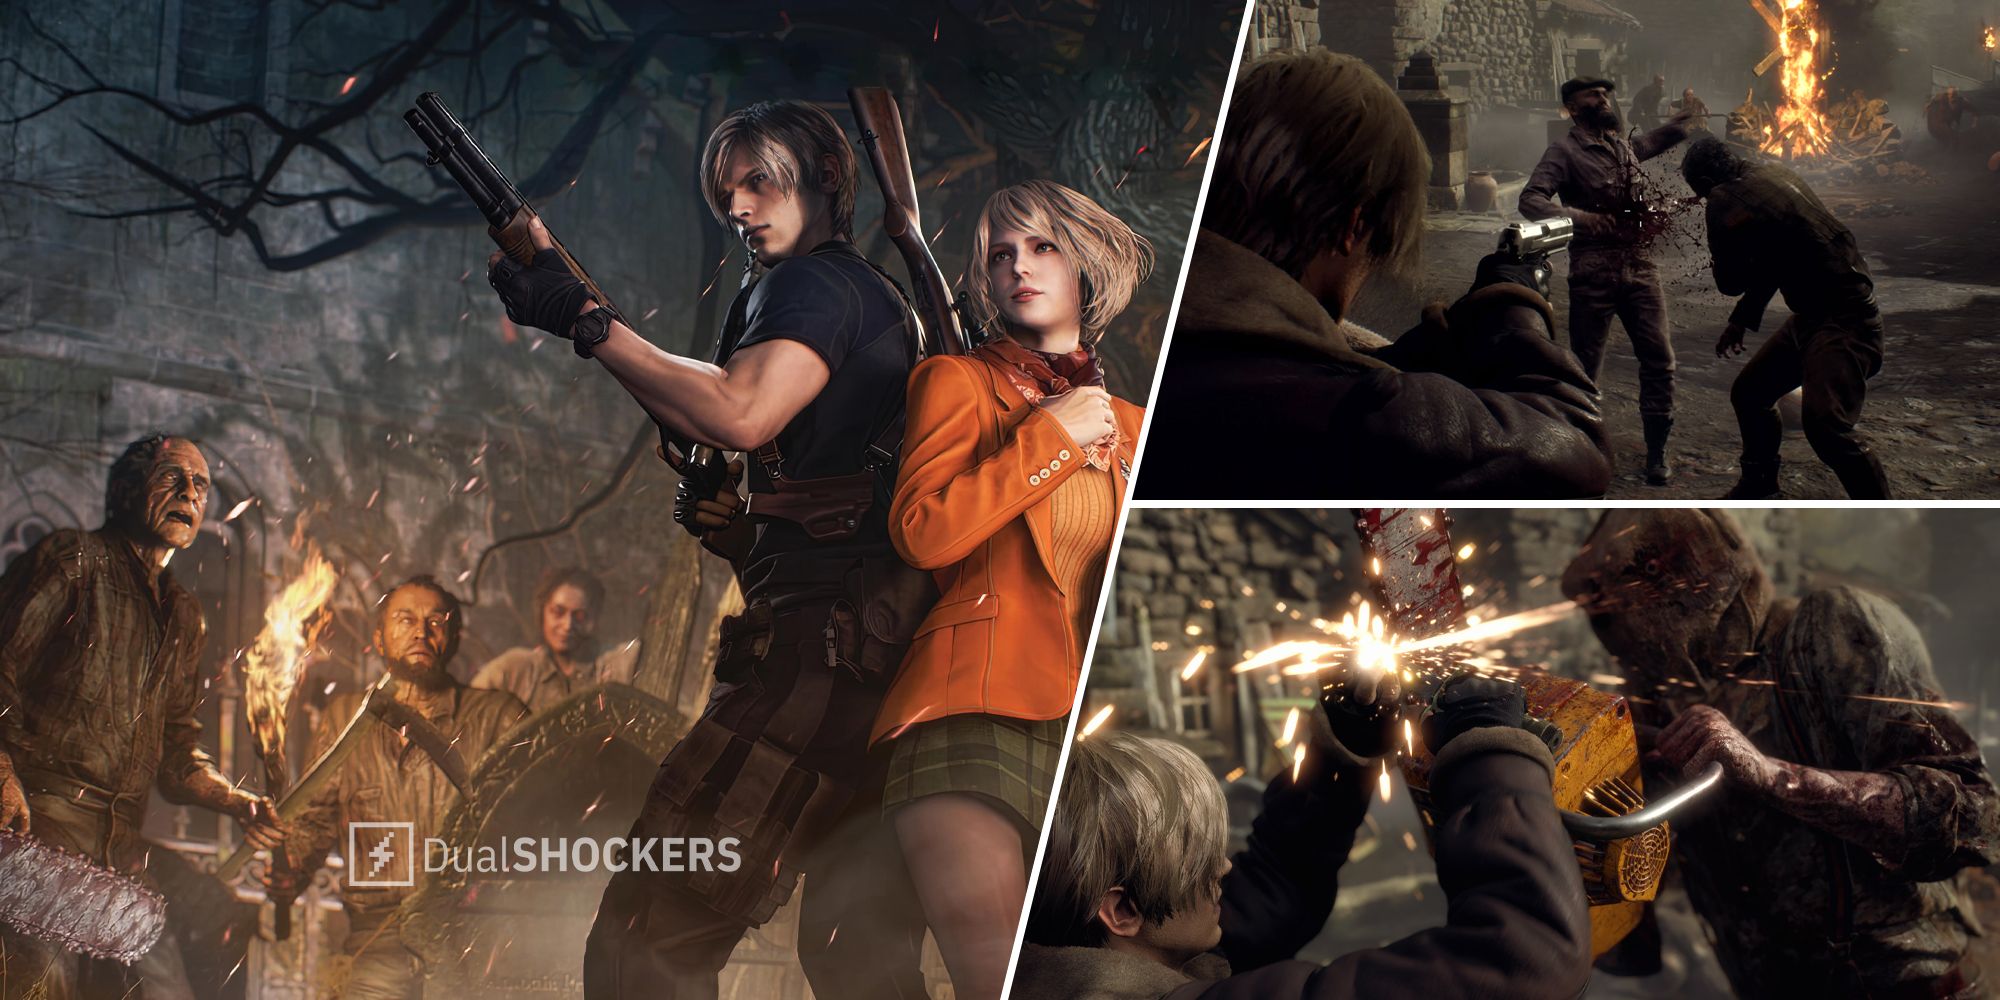 Resident Evil 4' Remake: How Long to Beat and New Game Plus, Explained